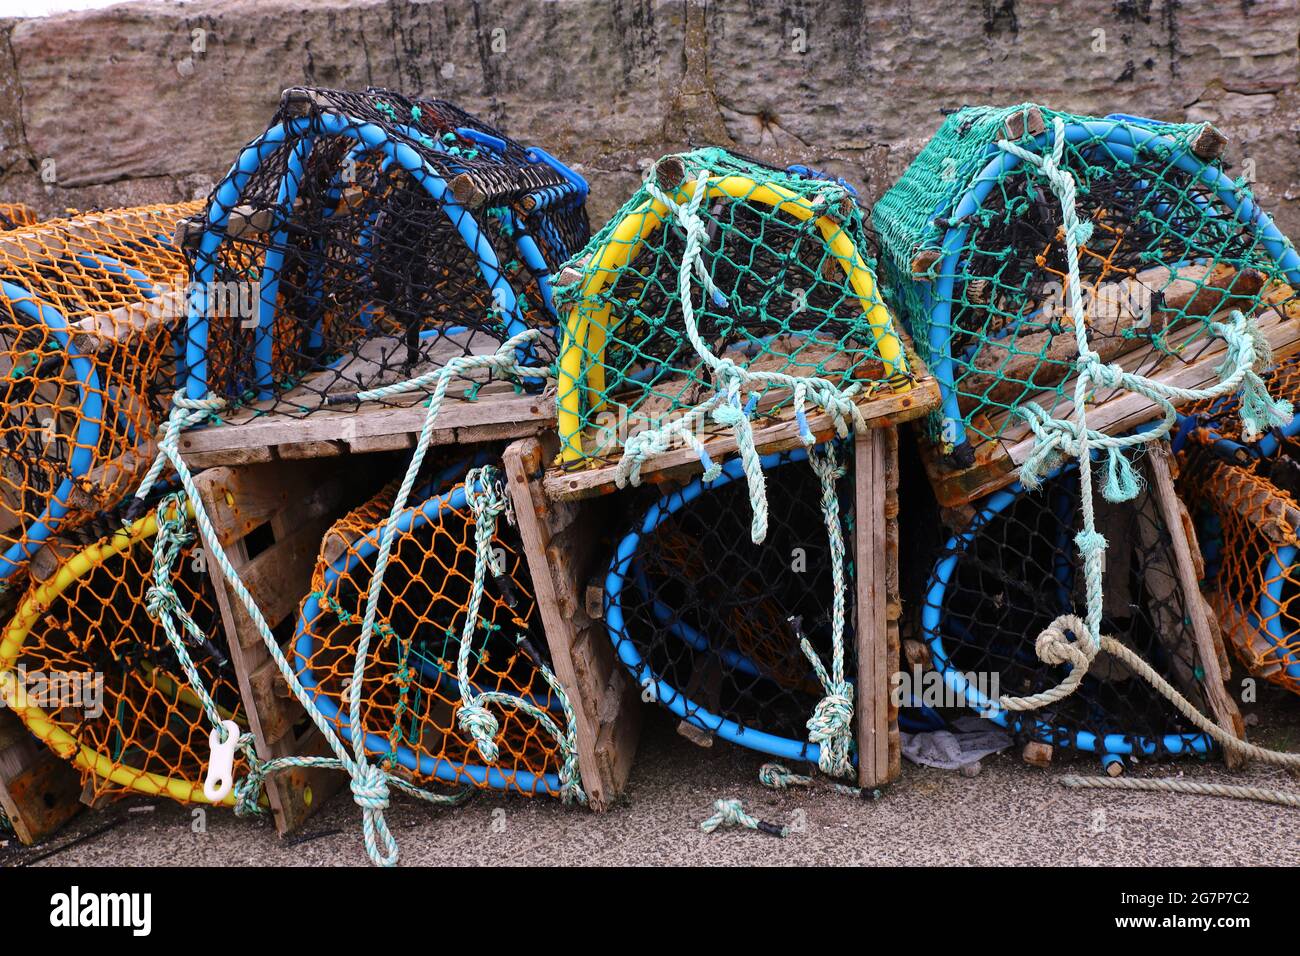 A lobster trap or lobster pot is a traps lobsters or crayfish.In